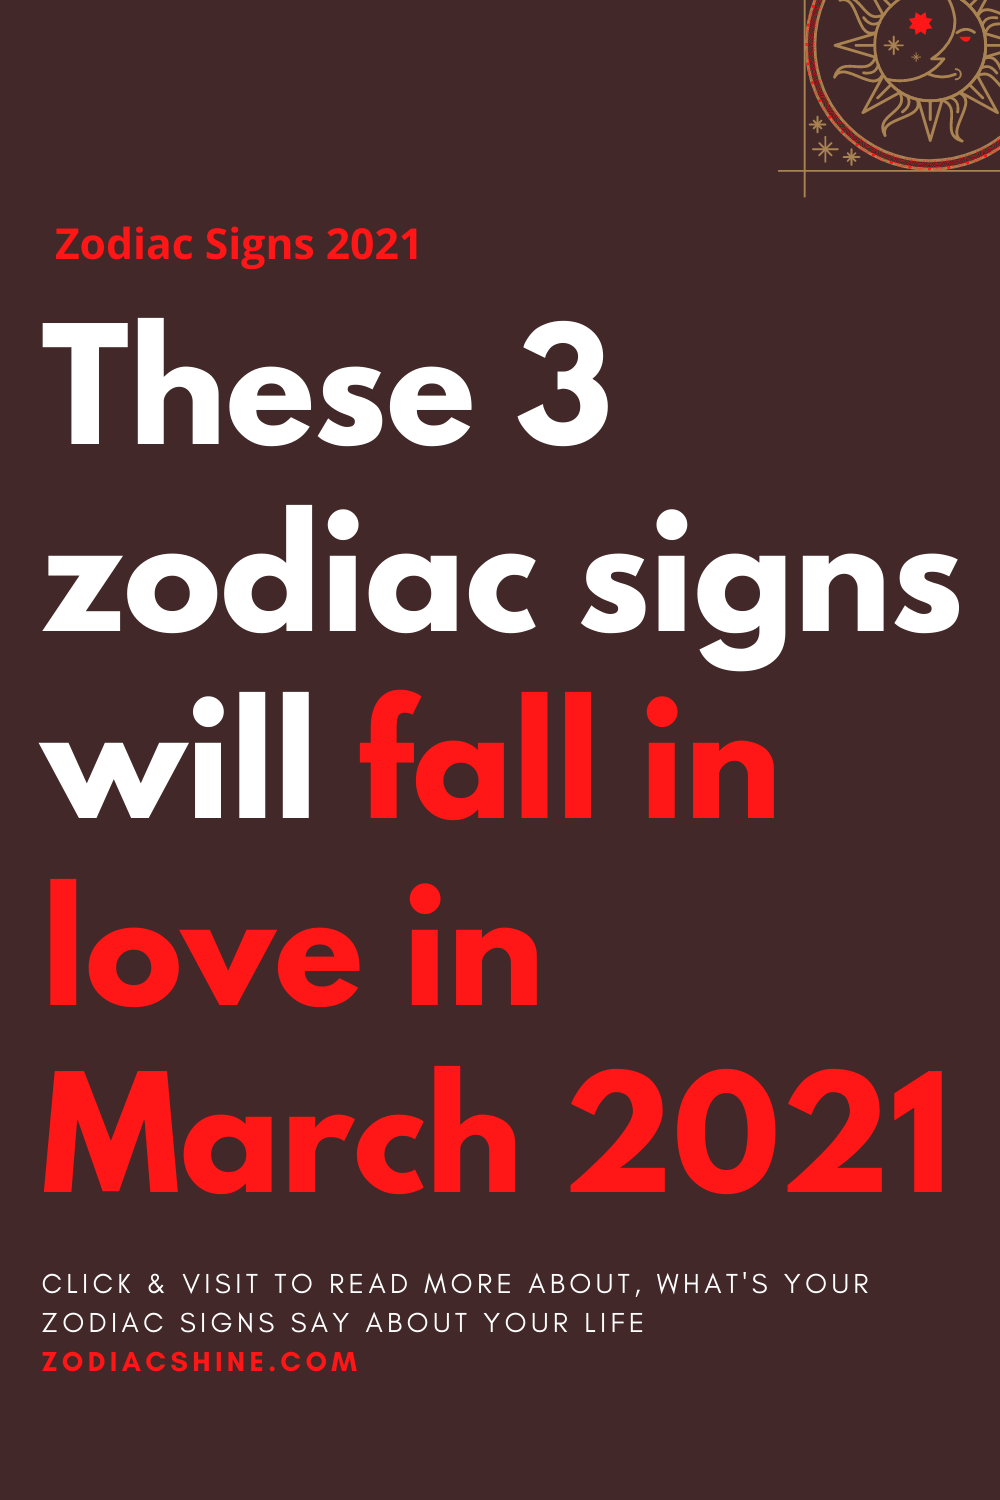 These 3 zodiac signs will fall in love in March 2021